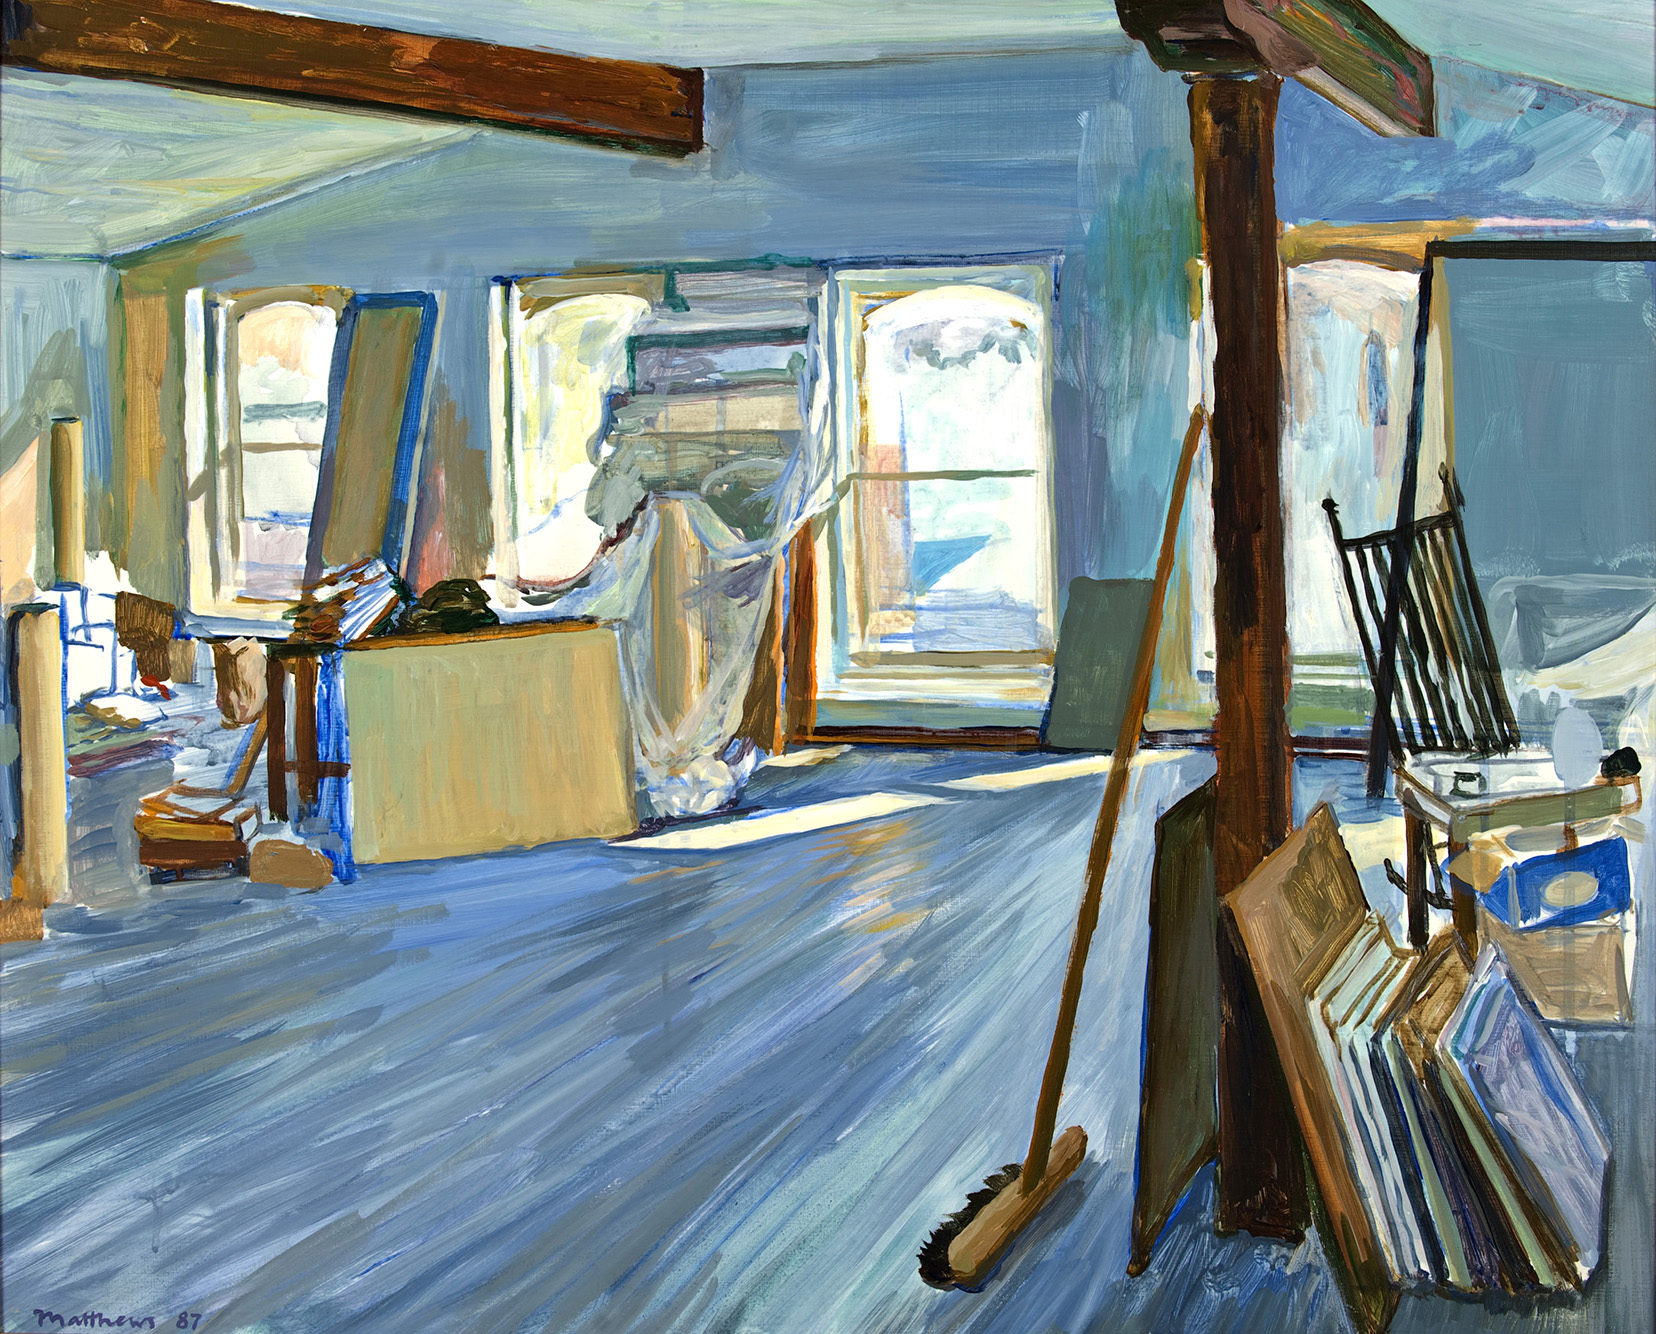  Studio at the People's Store; oil on board, 25 x 30